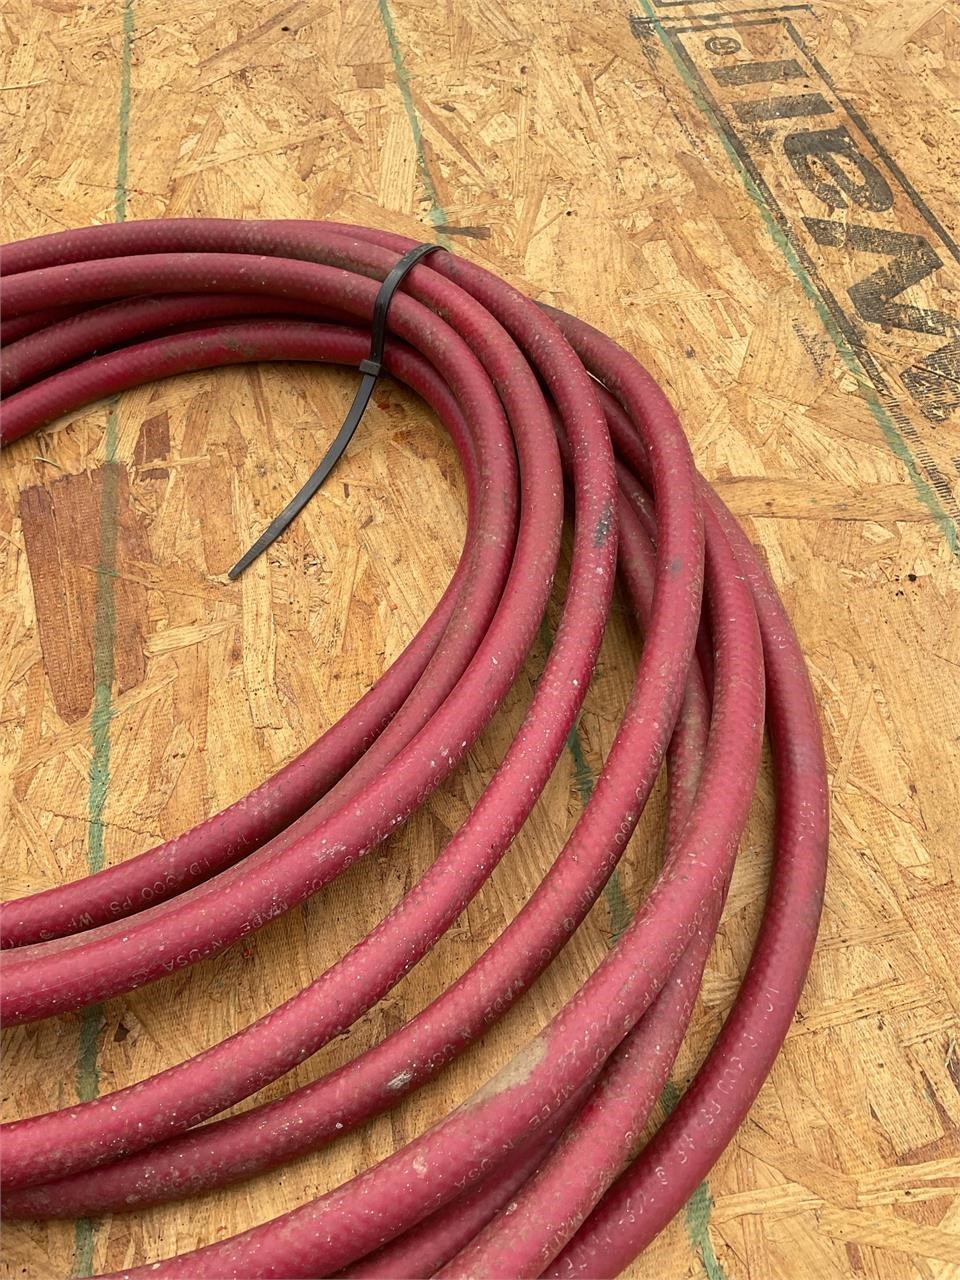 Air Hose with fittings on ends